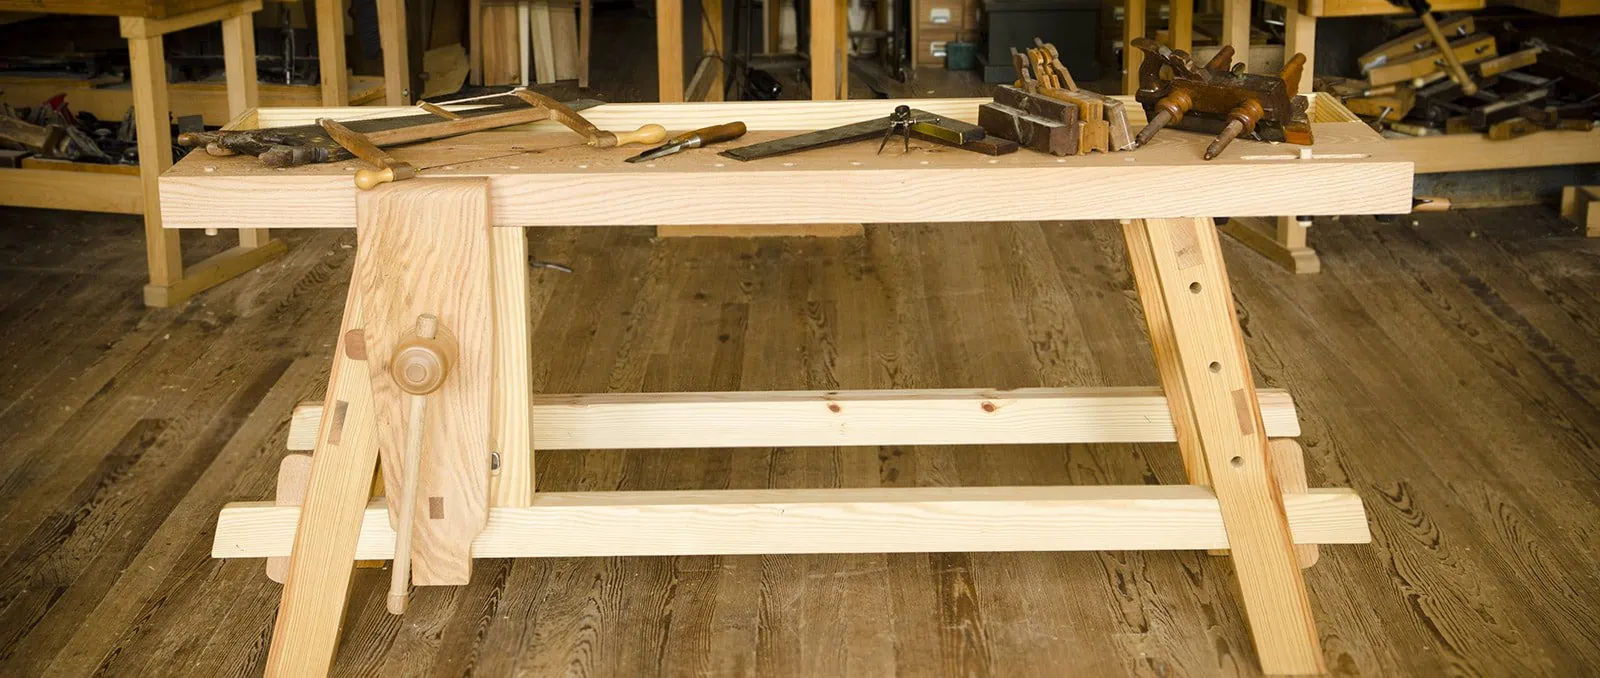 This Wooden Workbench Is A Portable Workbench Called The Moravian Workbench 